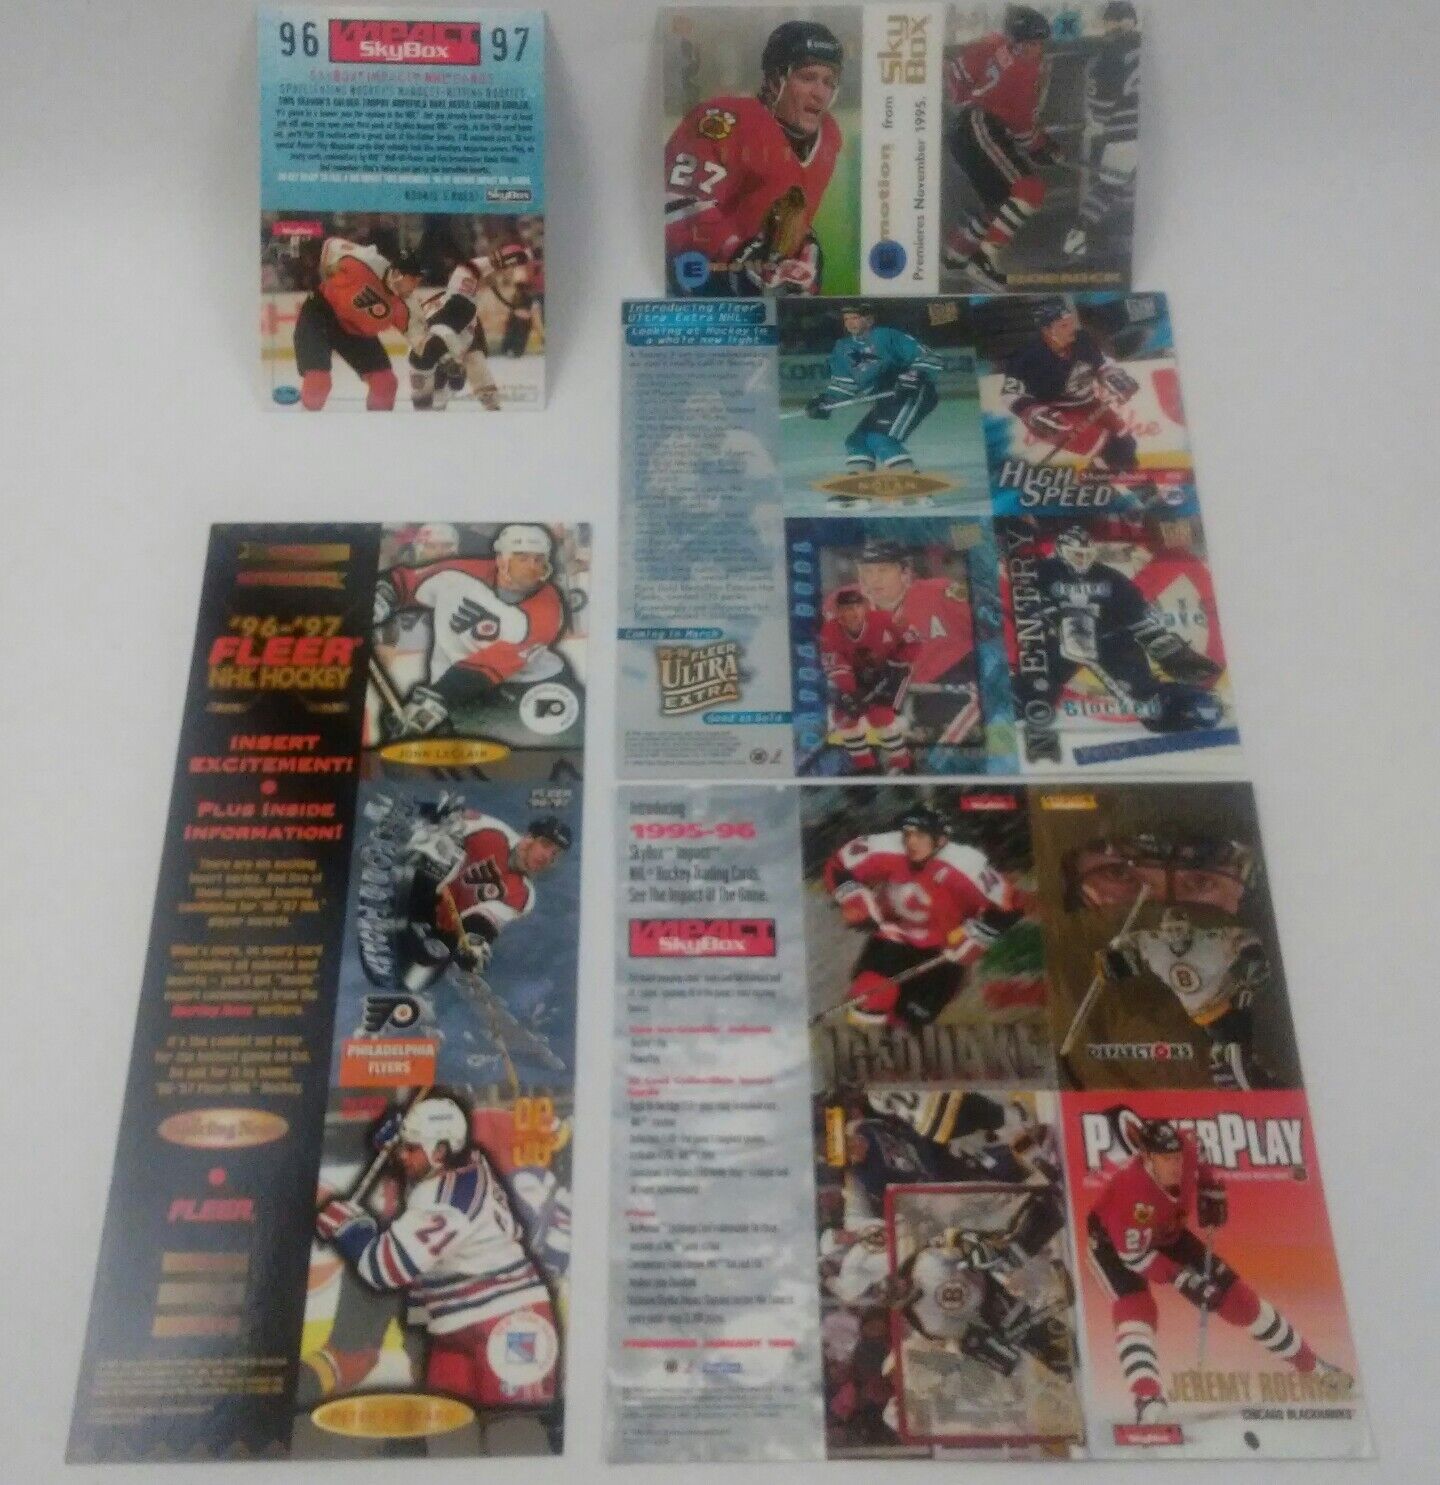 1995-97 Fleer NHL Hockey Impact Skybox Promo Trading Cards Lot of 14 Cards